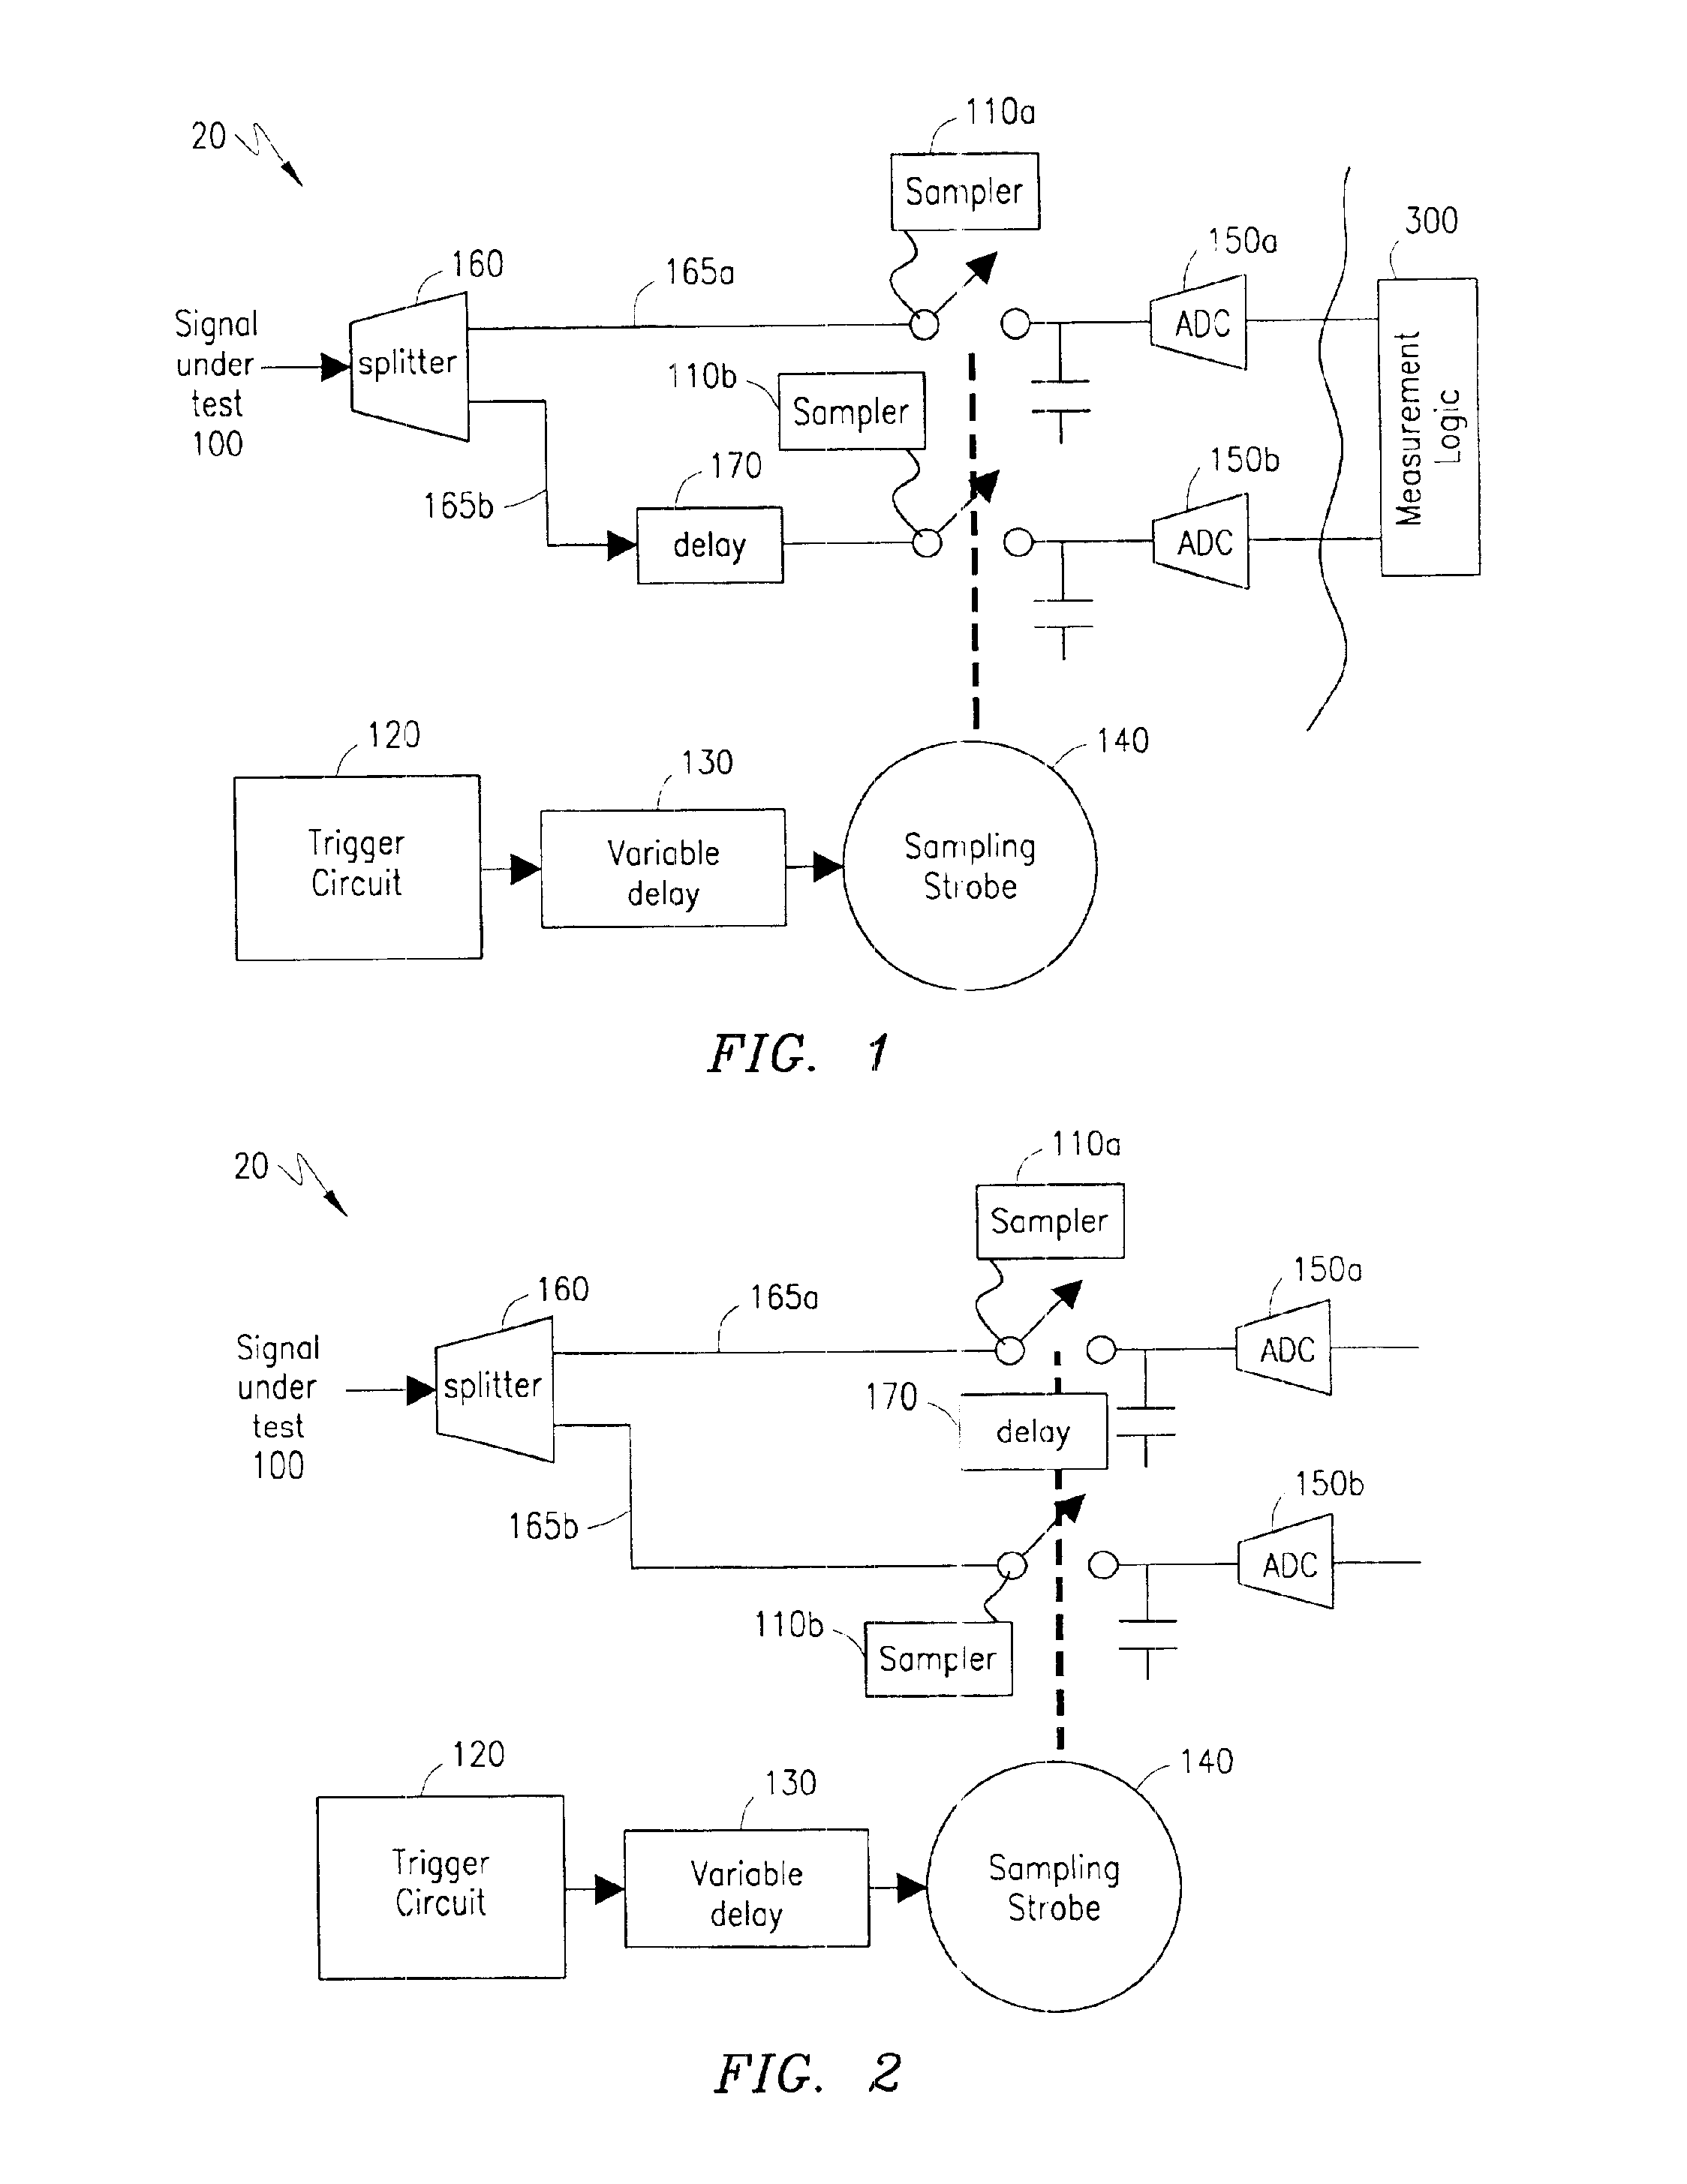 Zero-crossing direction and time interval jitter measurement apparatus using offset sampling